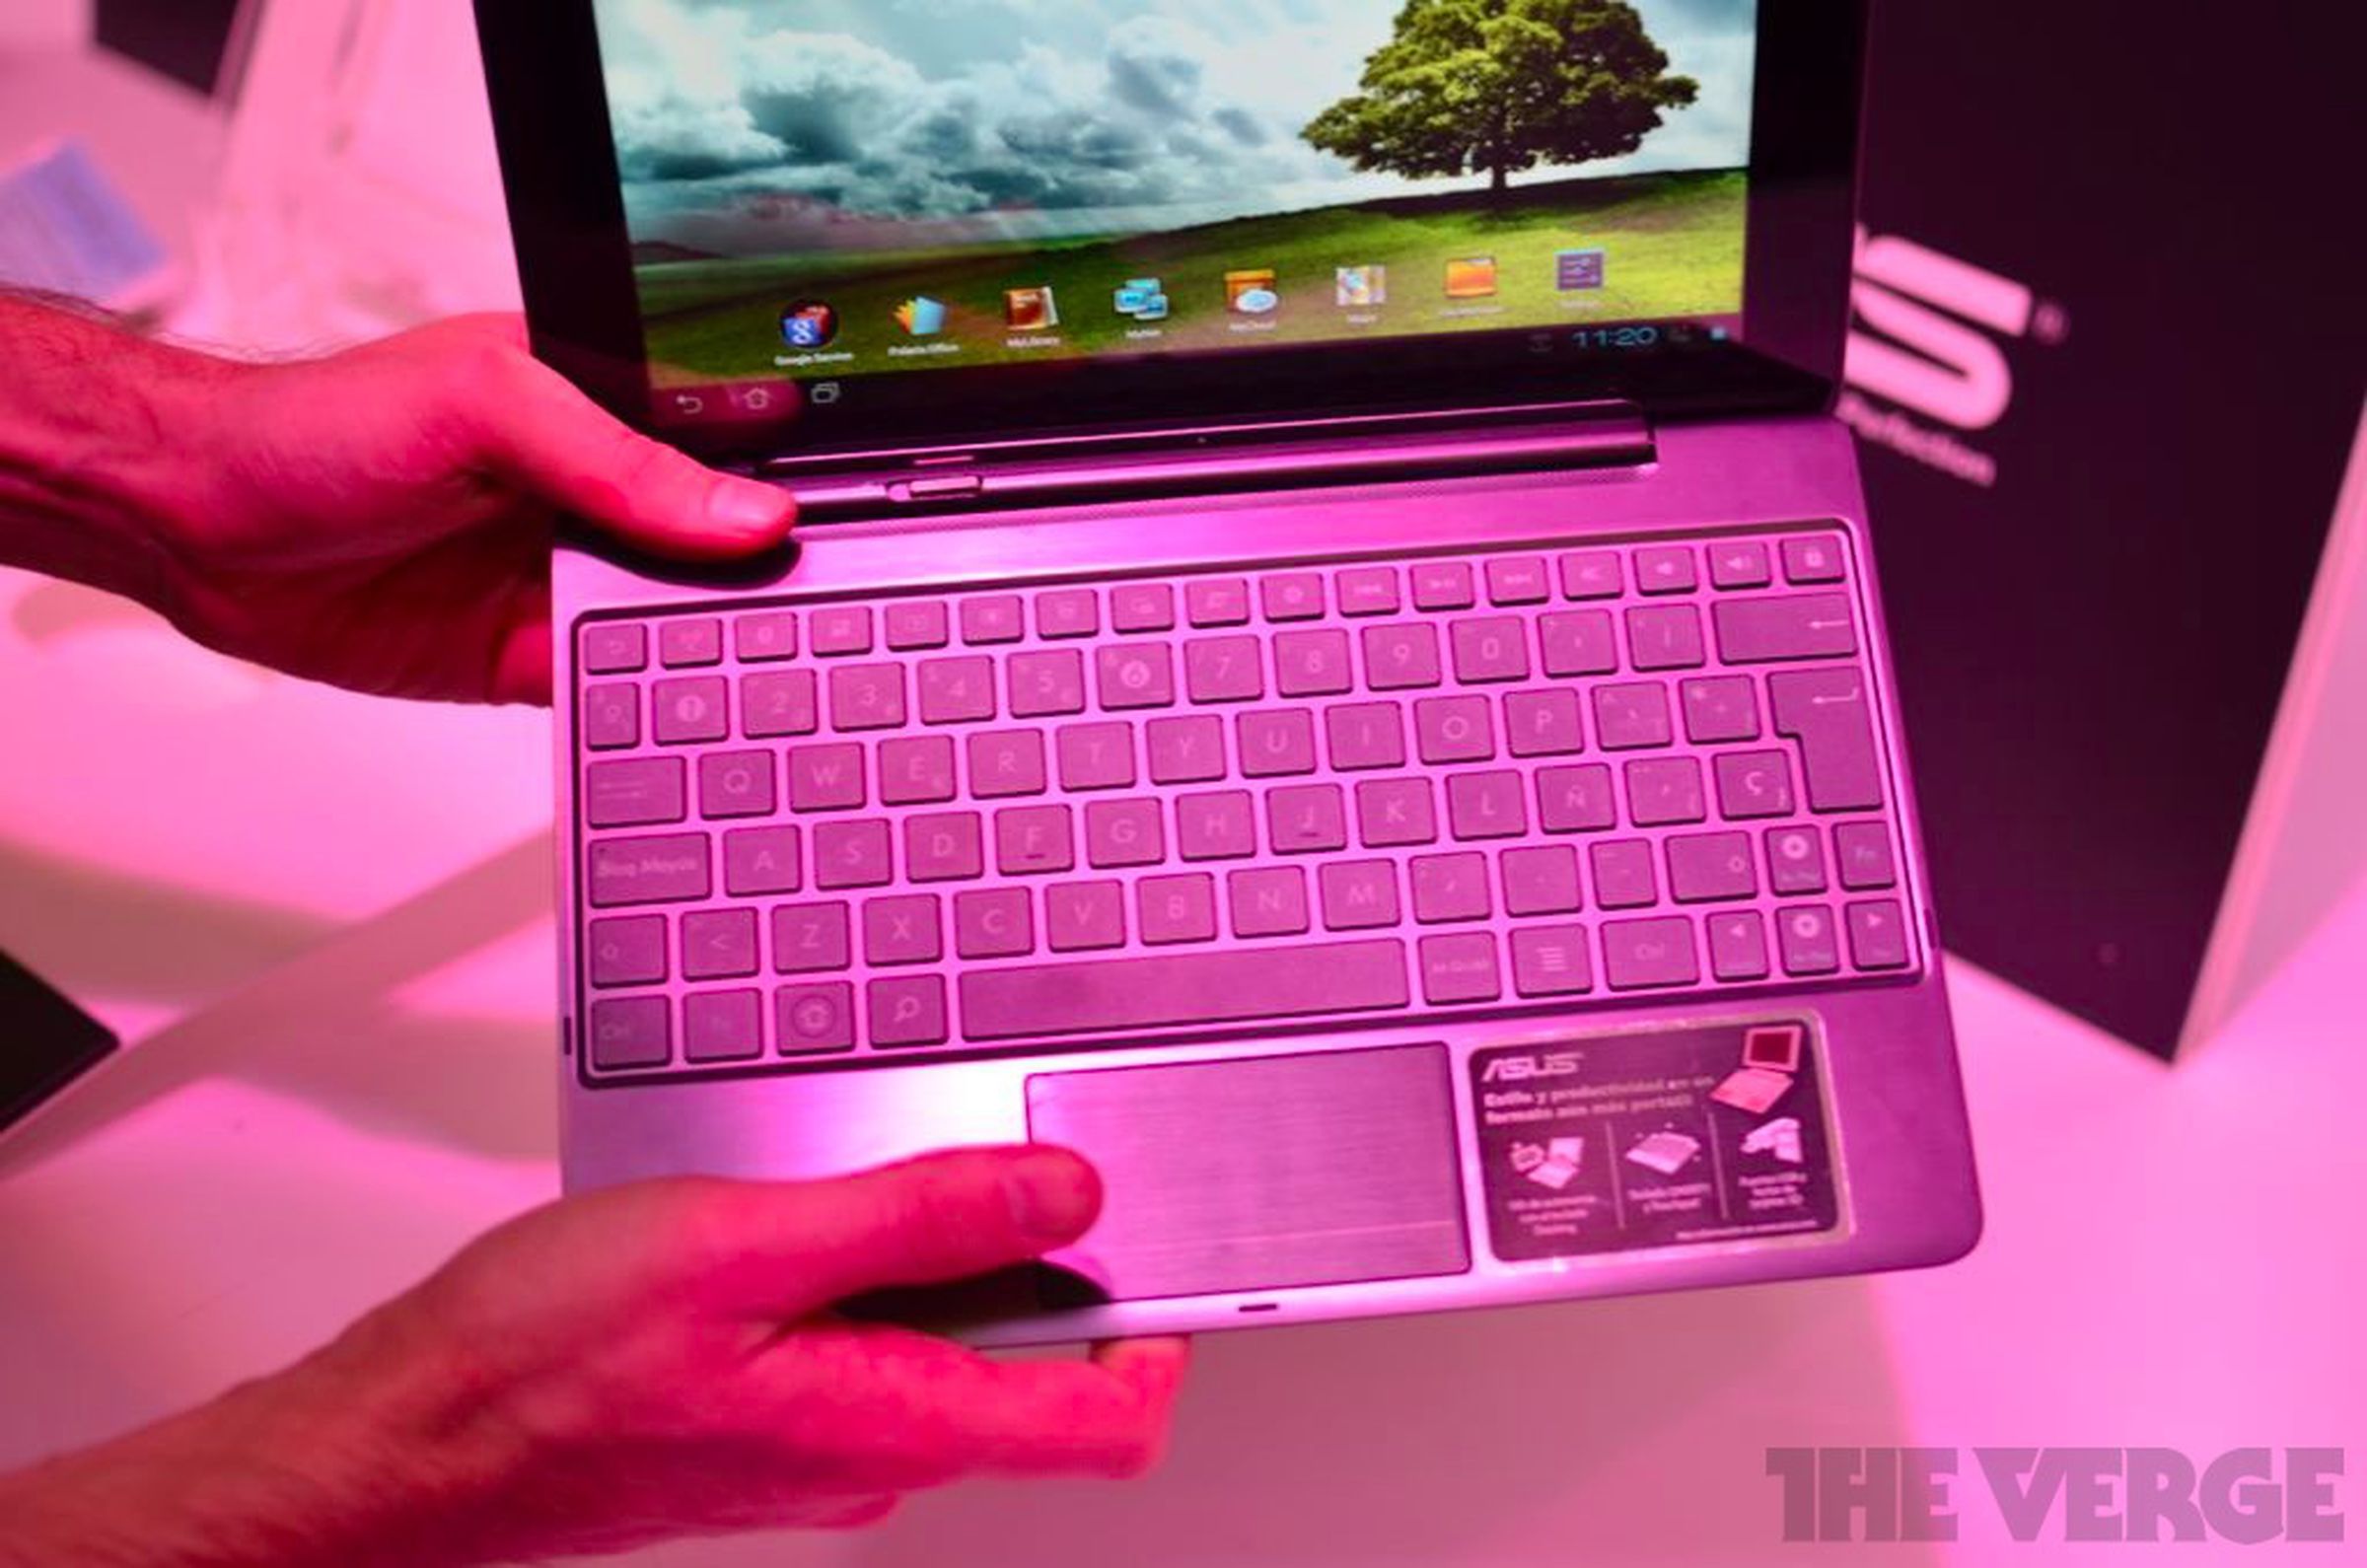 Asus Tranformer Pad Infinity Series and Transformer Pad 300 series pictures